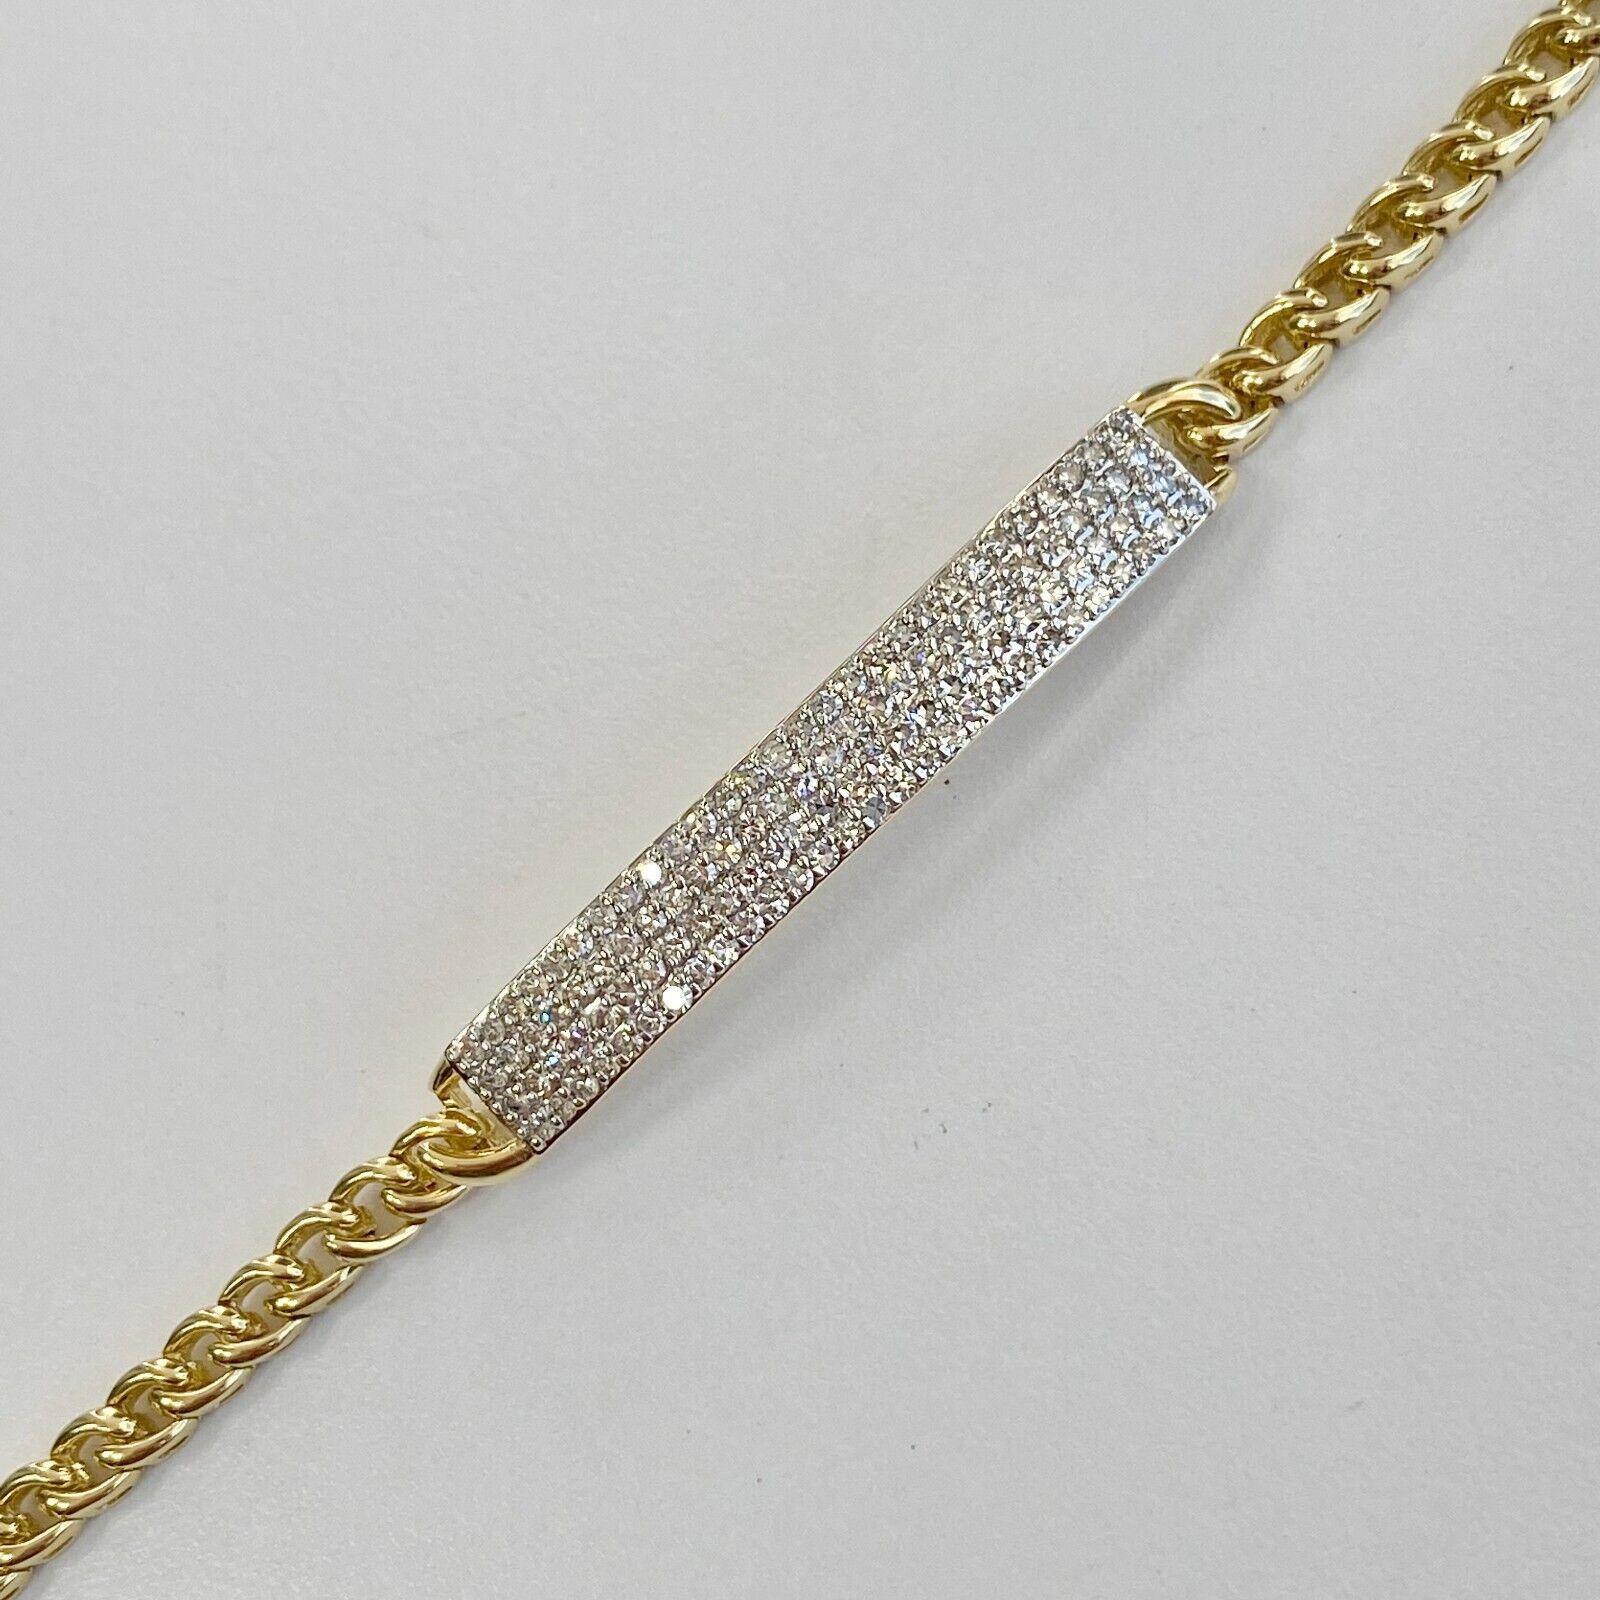 Specifications:
    main stone:SINGLE CUT DIAMONDS
    diamonds:112 PC
    carat total weight:1.12 CT
    color:F
    clarity:VS2
    brand:CUSTOM MADE
    metal:14K YELLOW gold - 11.38GR
    type:BRACELET
    weight:1.9 gr
    LENGTH:6-7 INCH 
   